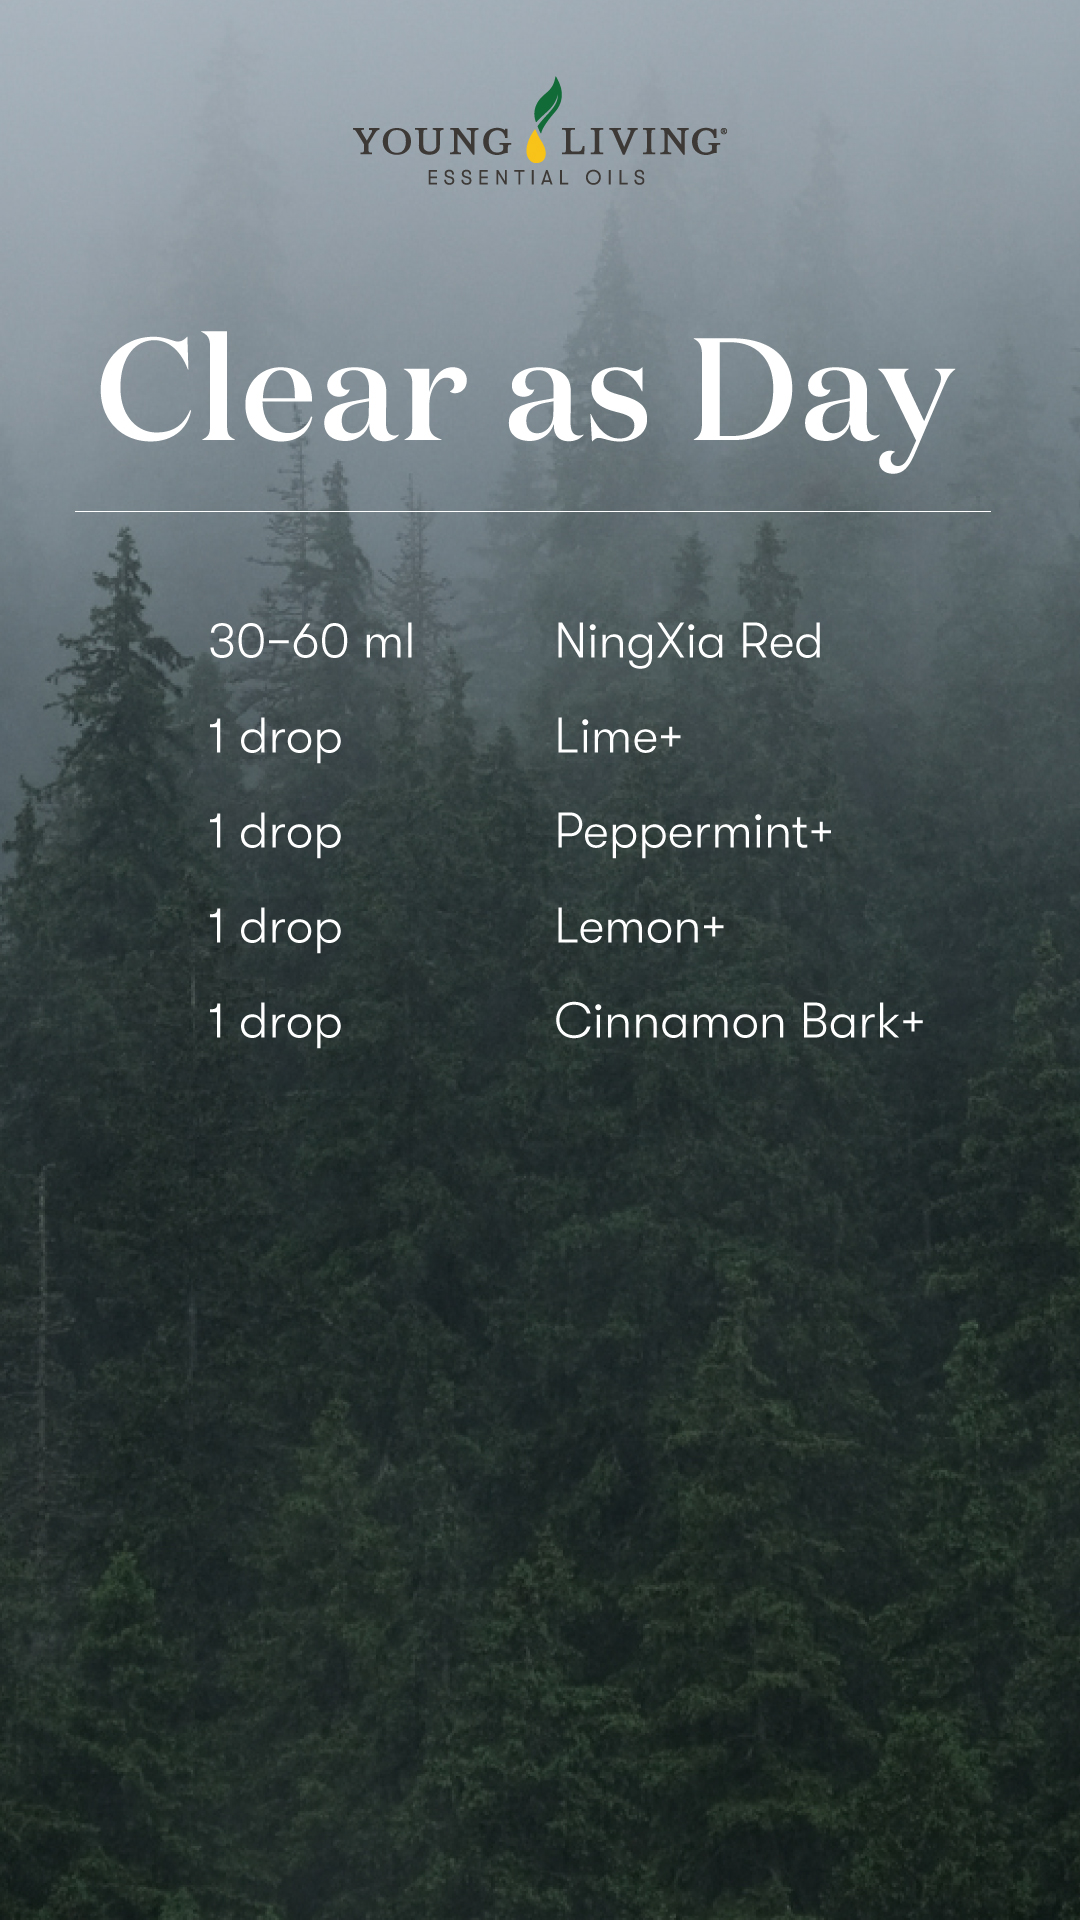 Ningxia Red Shot Recipe - Clear as day